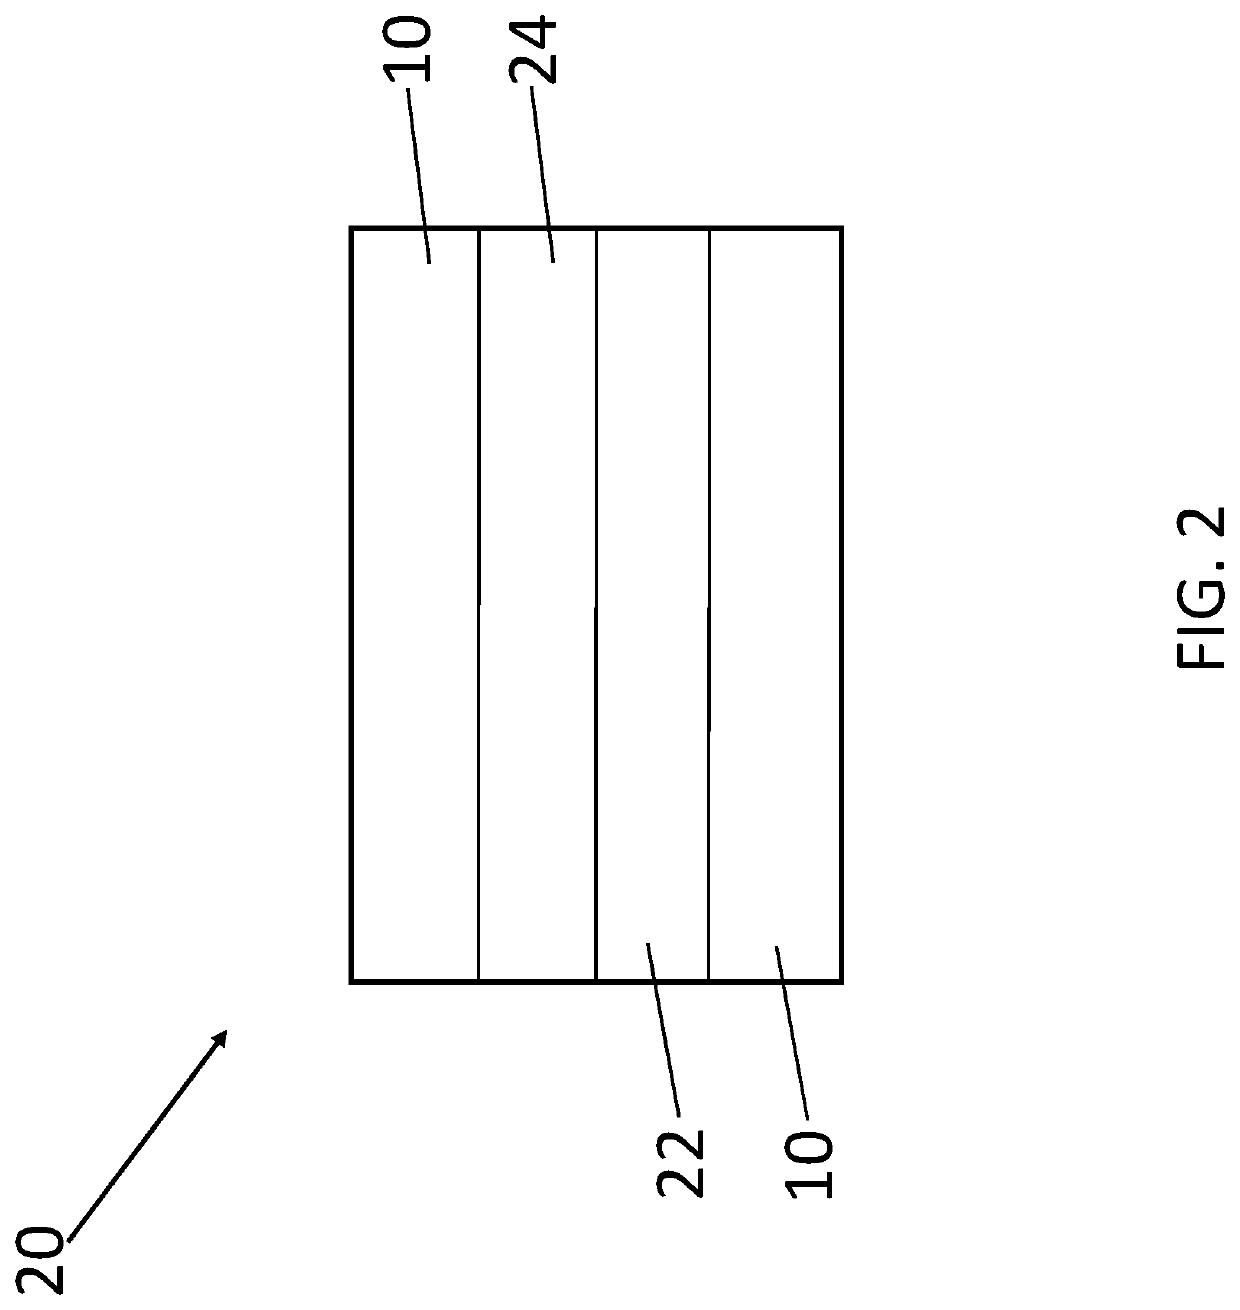 Method of making an electrochemical cell